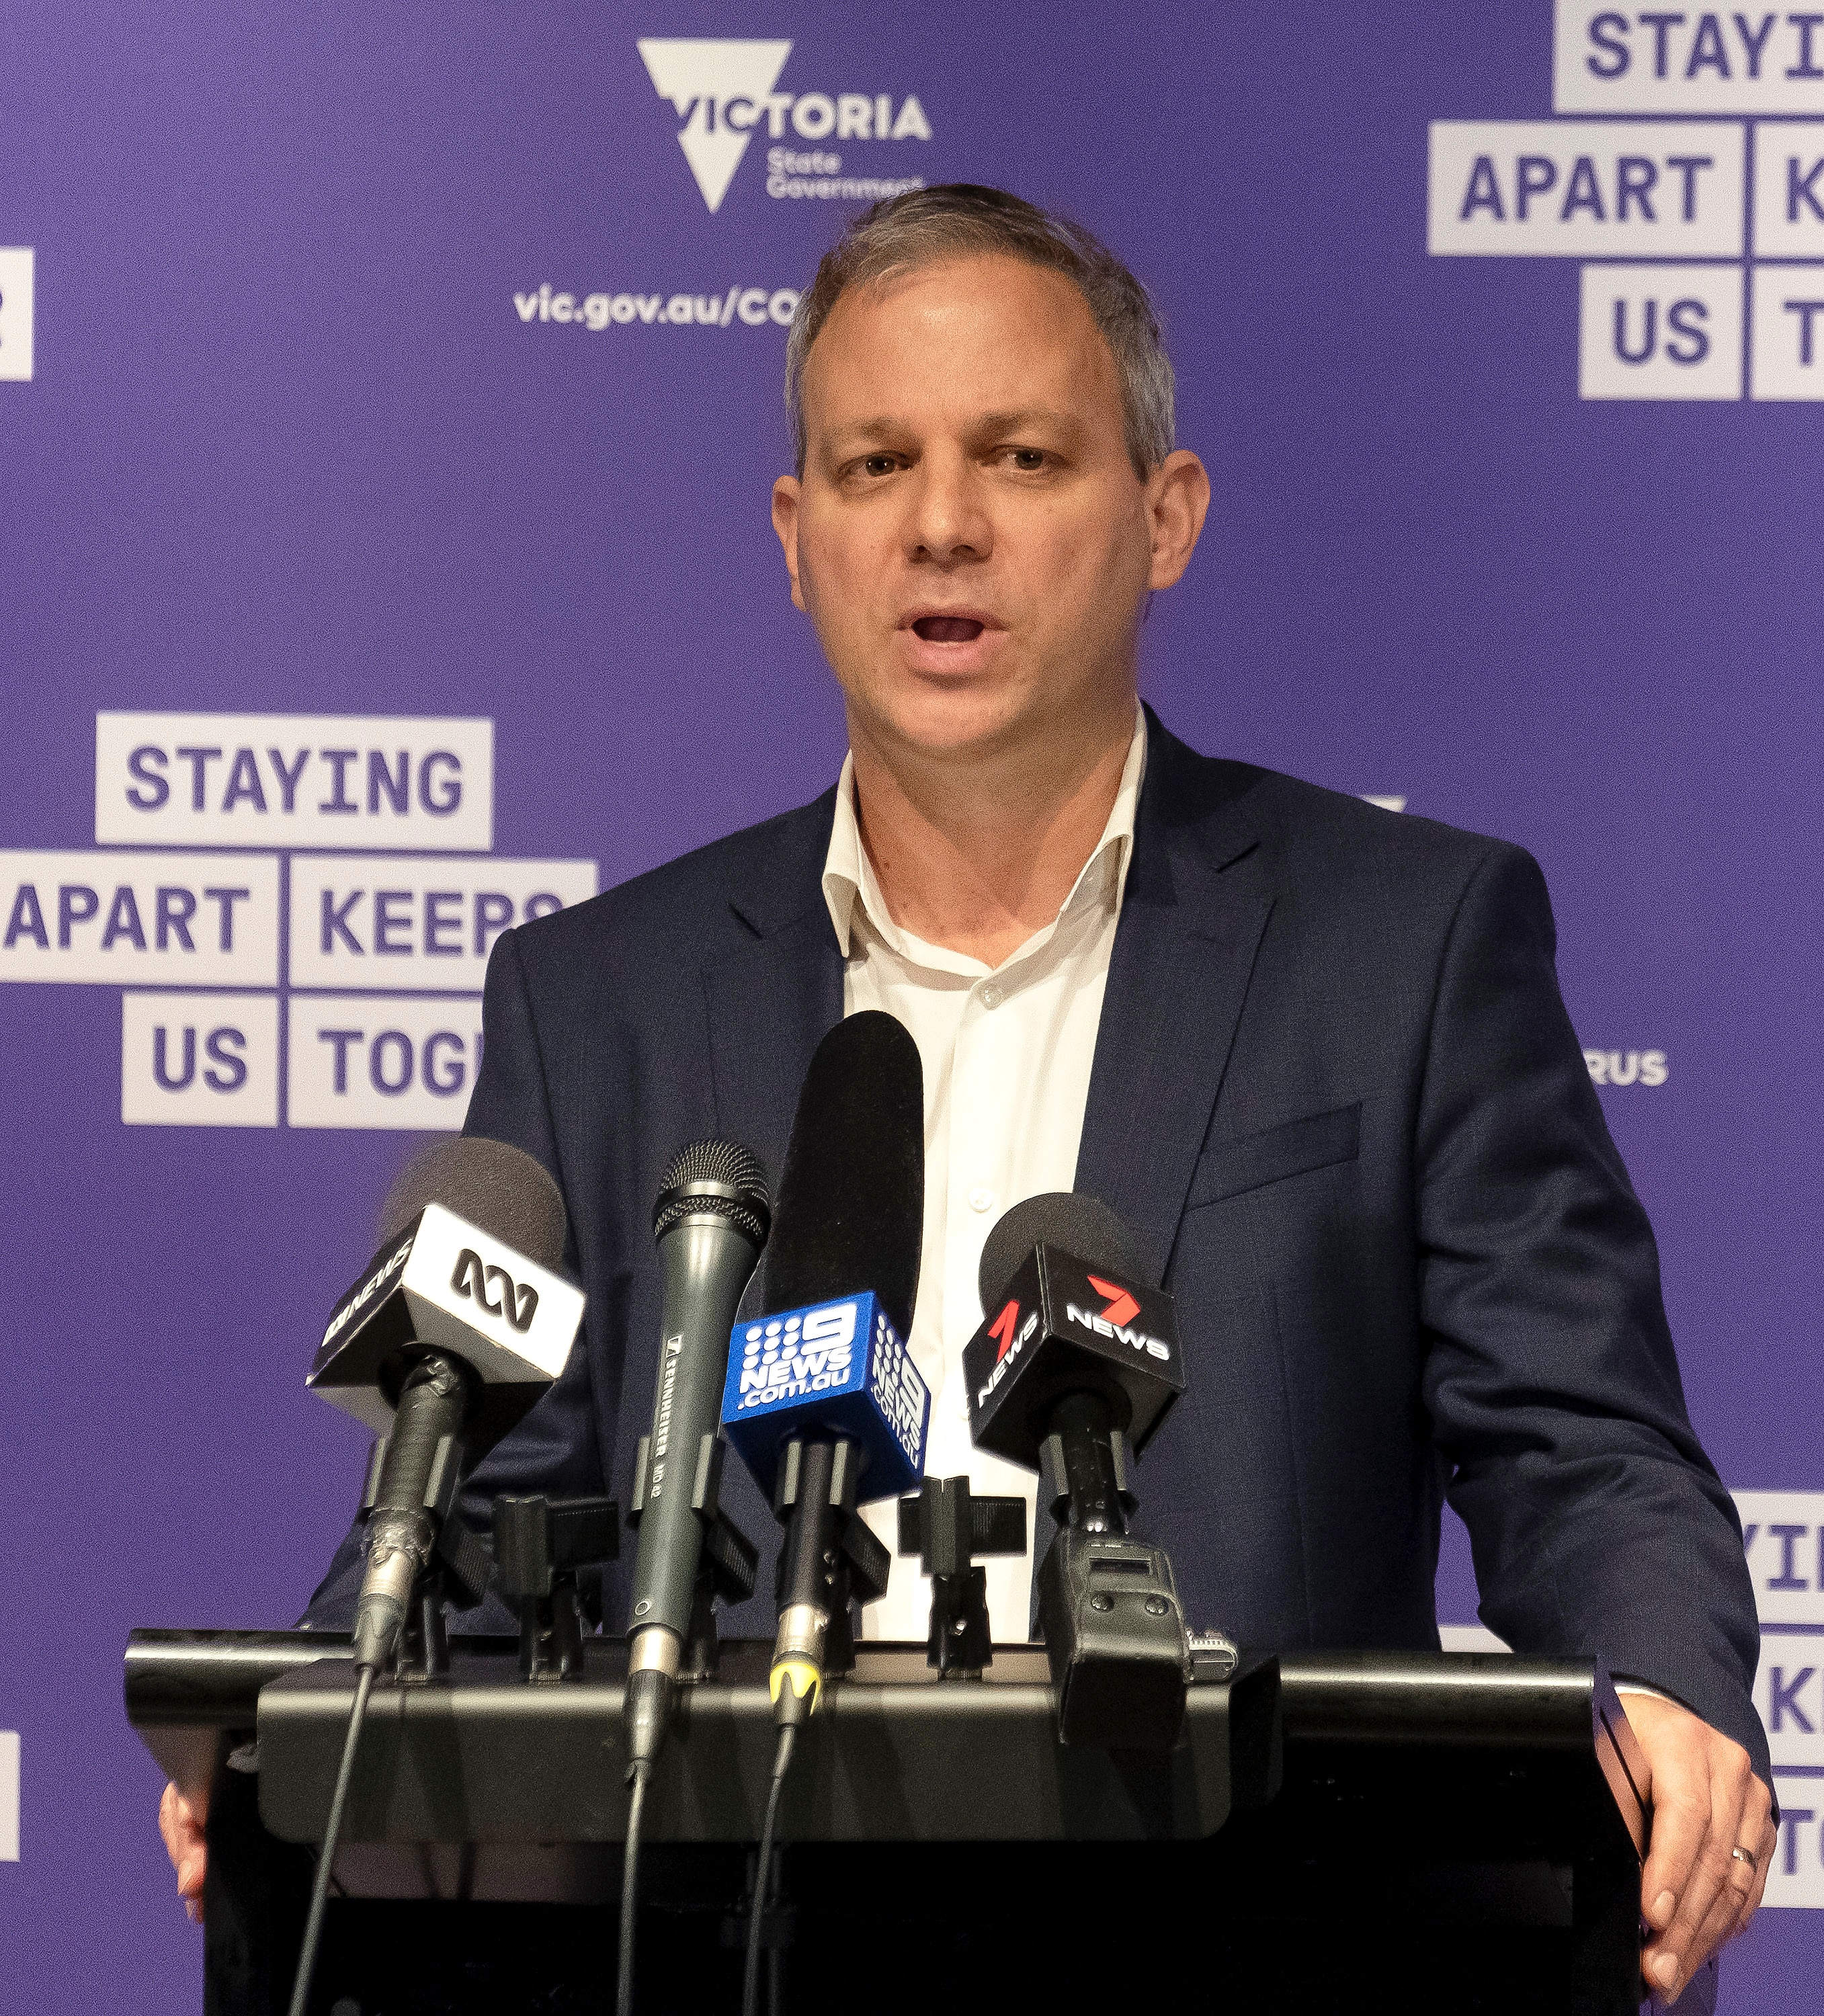 Victoria's Chief Health Officer Brett Sutton speaks to the media during a press conference at Treasury Theatre in Melbourne, Saturday, June 20, 2020. (AAP Image/Luis Ascui) NO ARCHIVING